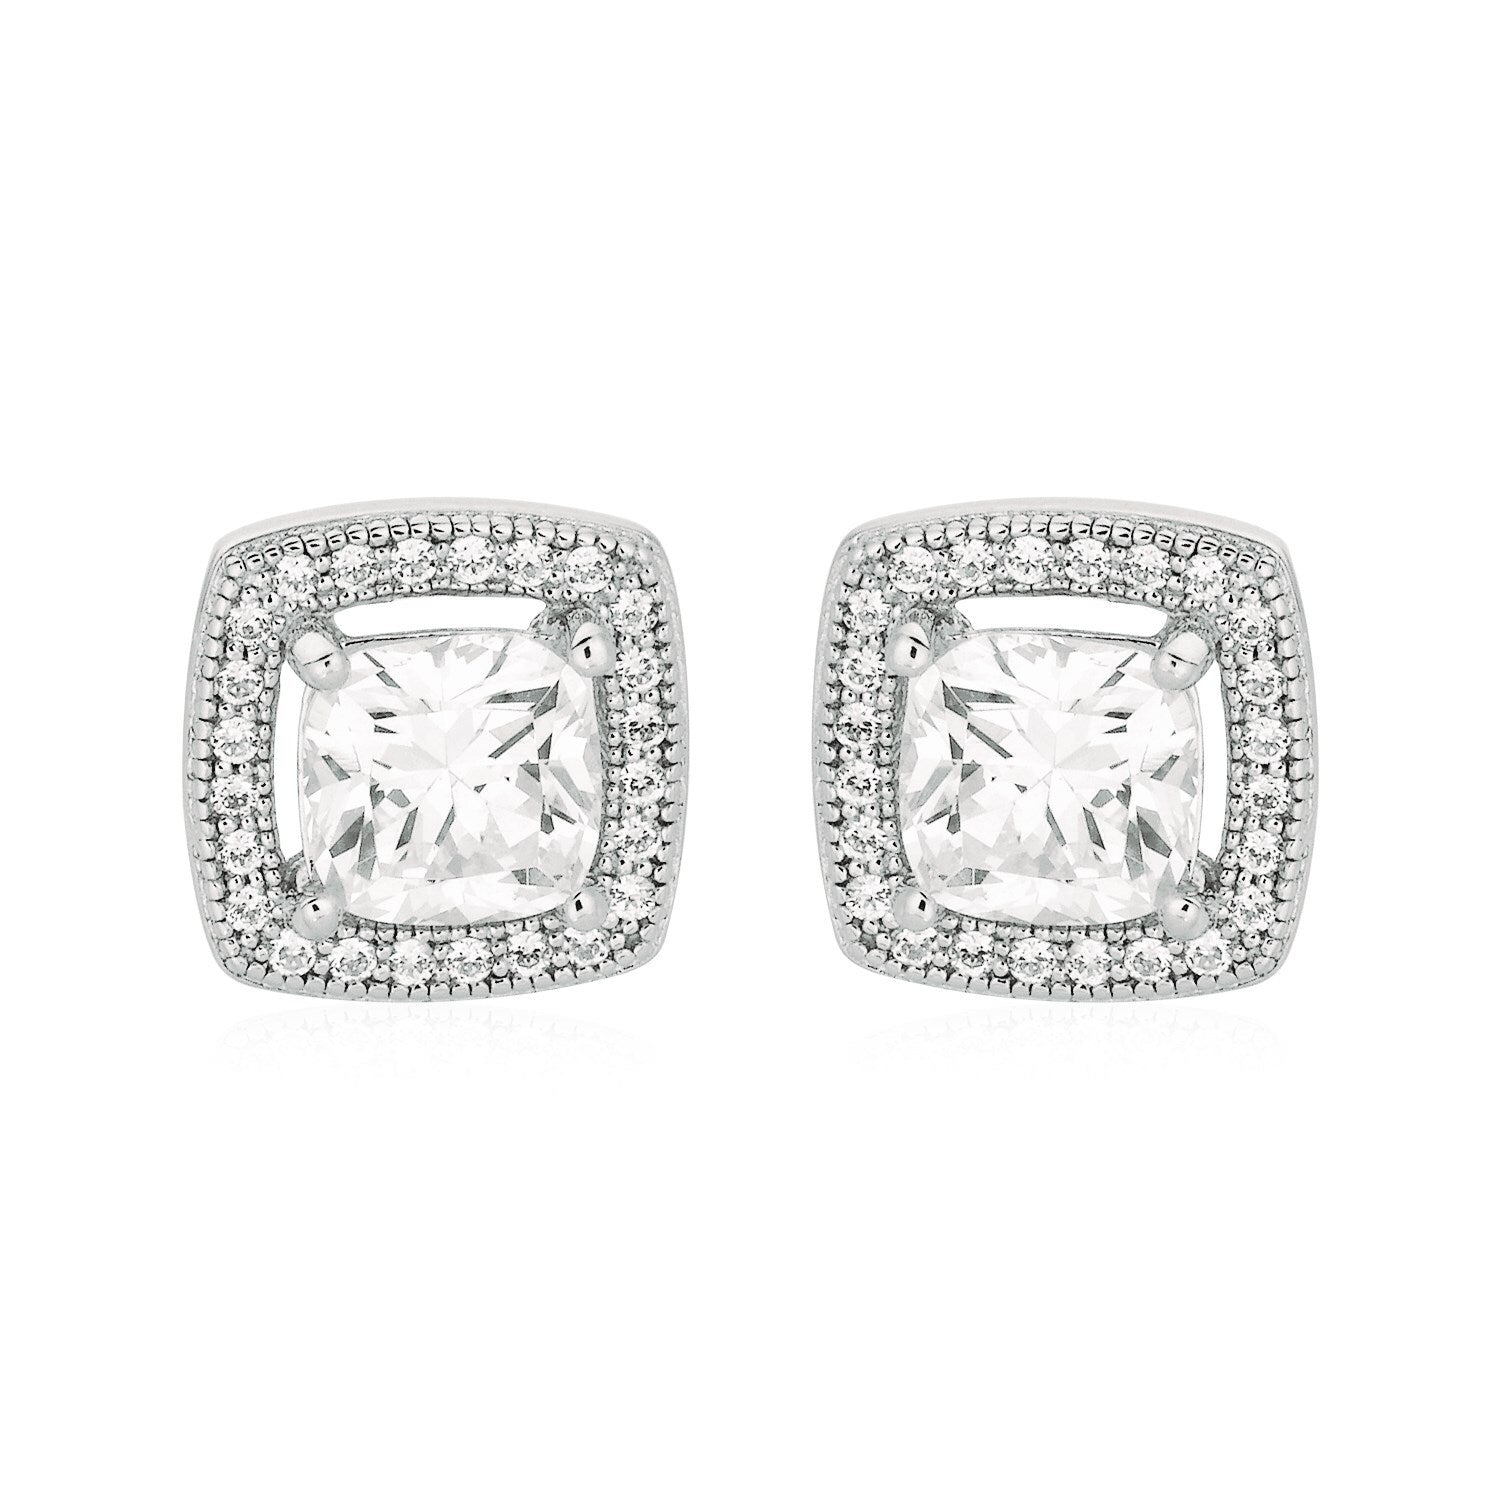 Cushion Earrings with Cubic Zirconia in Sterling Silver